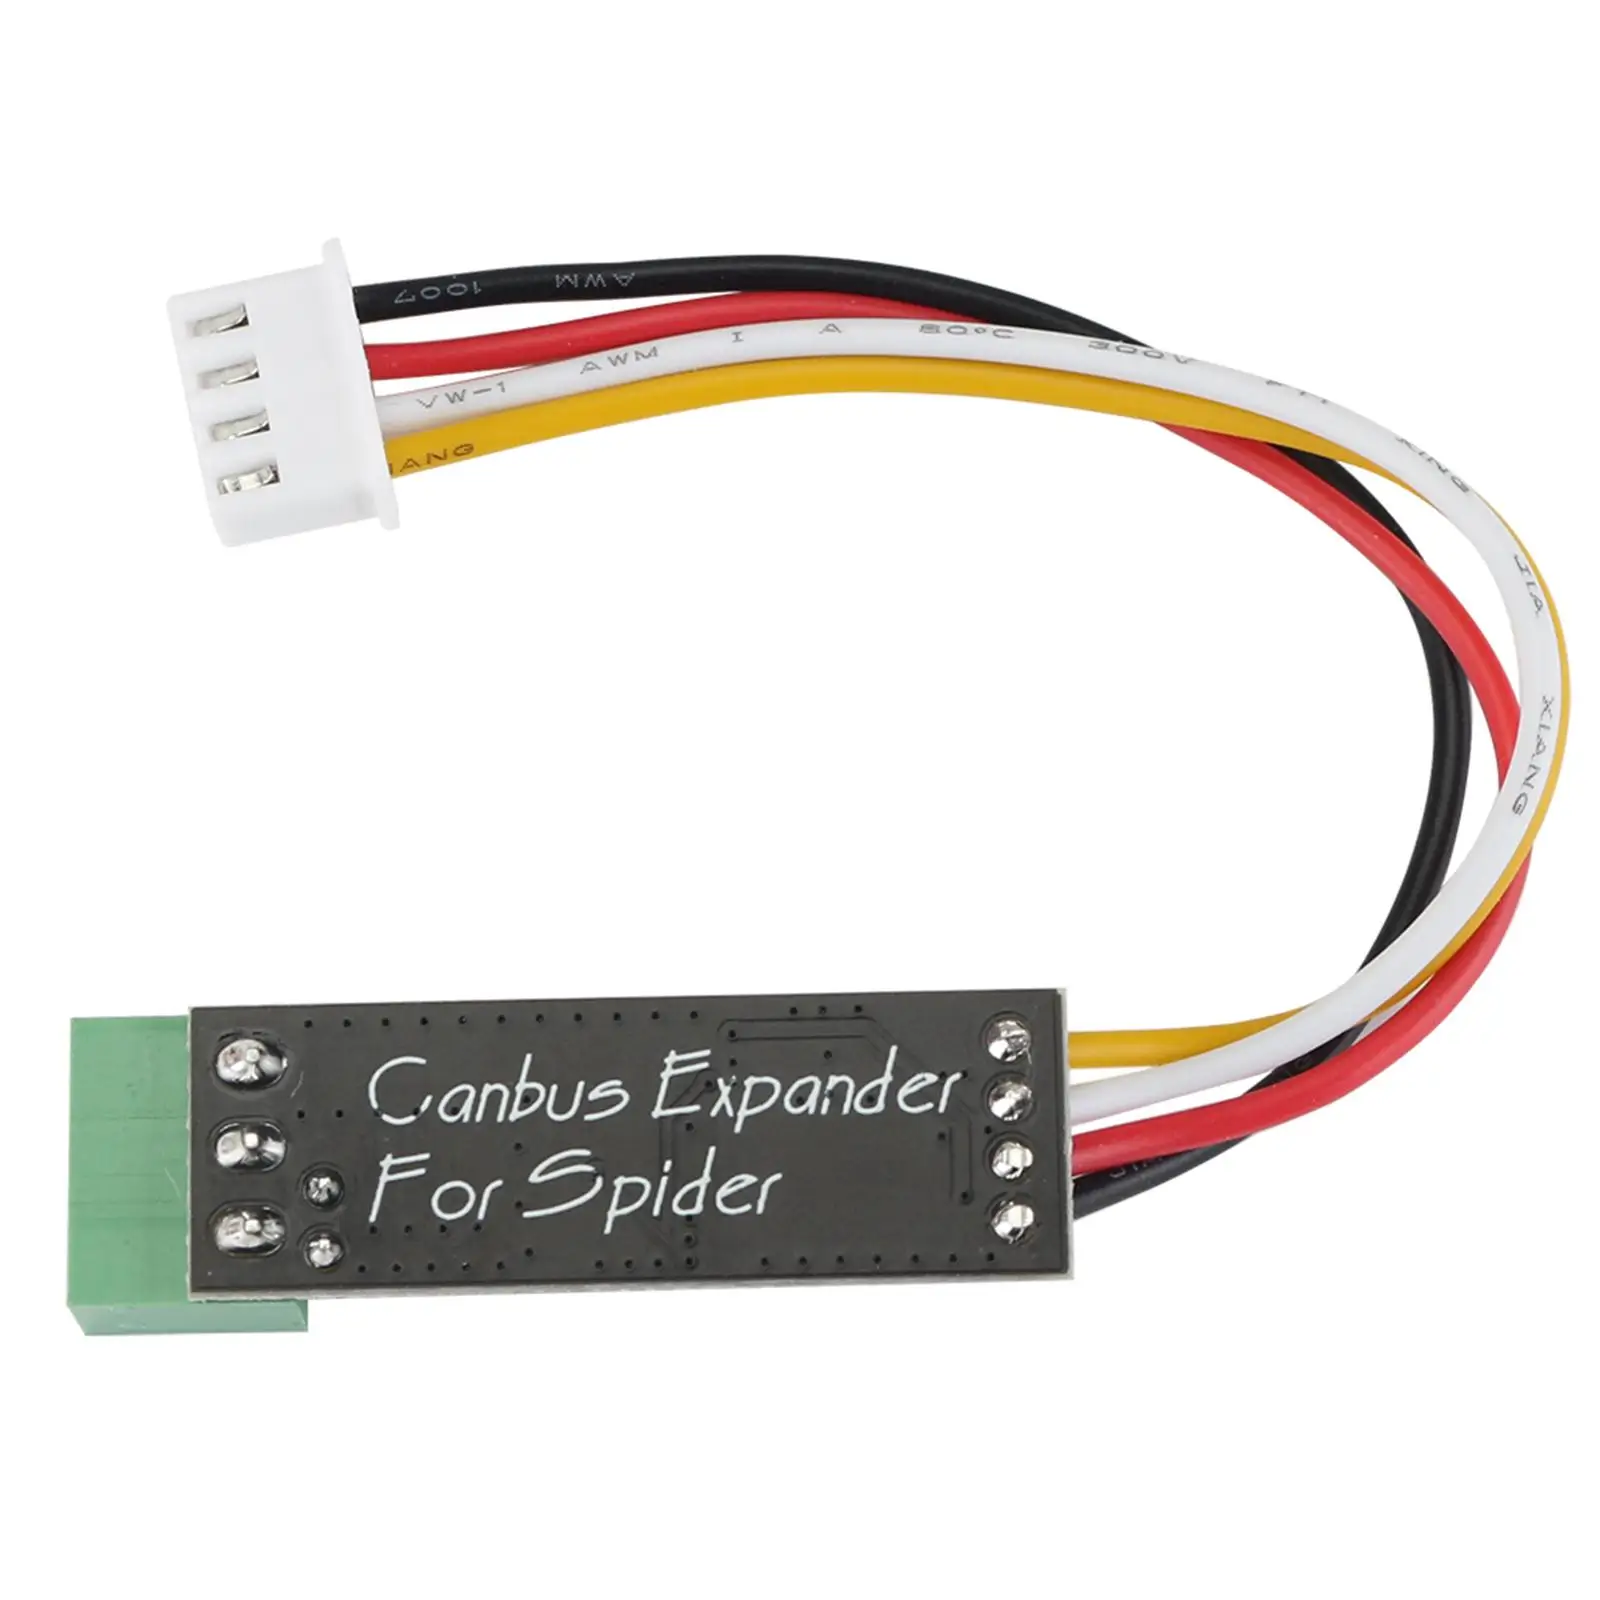 Canbus Expander Module Replaces Easy to Install Expander Professional